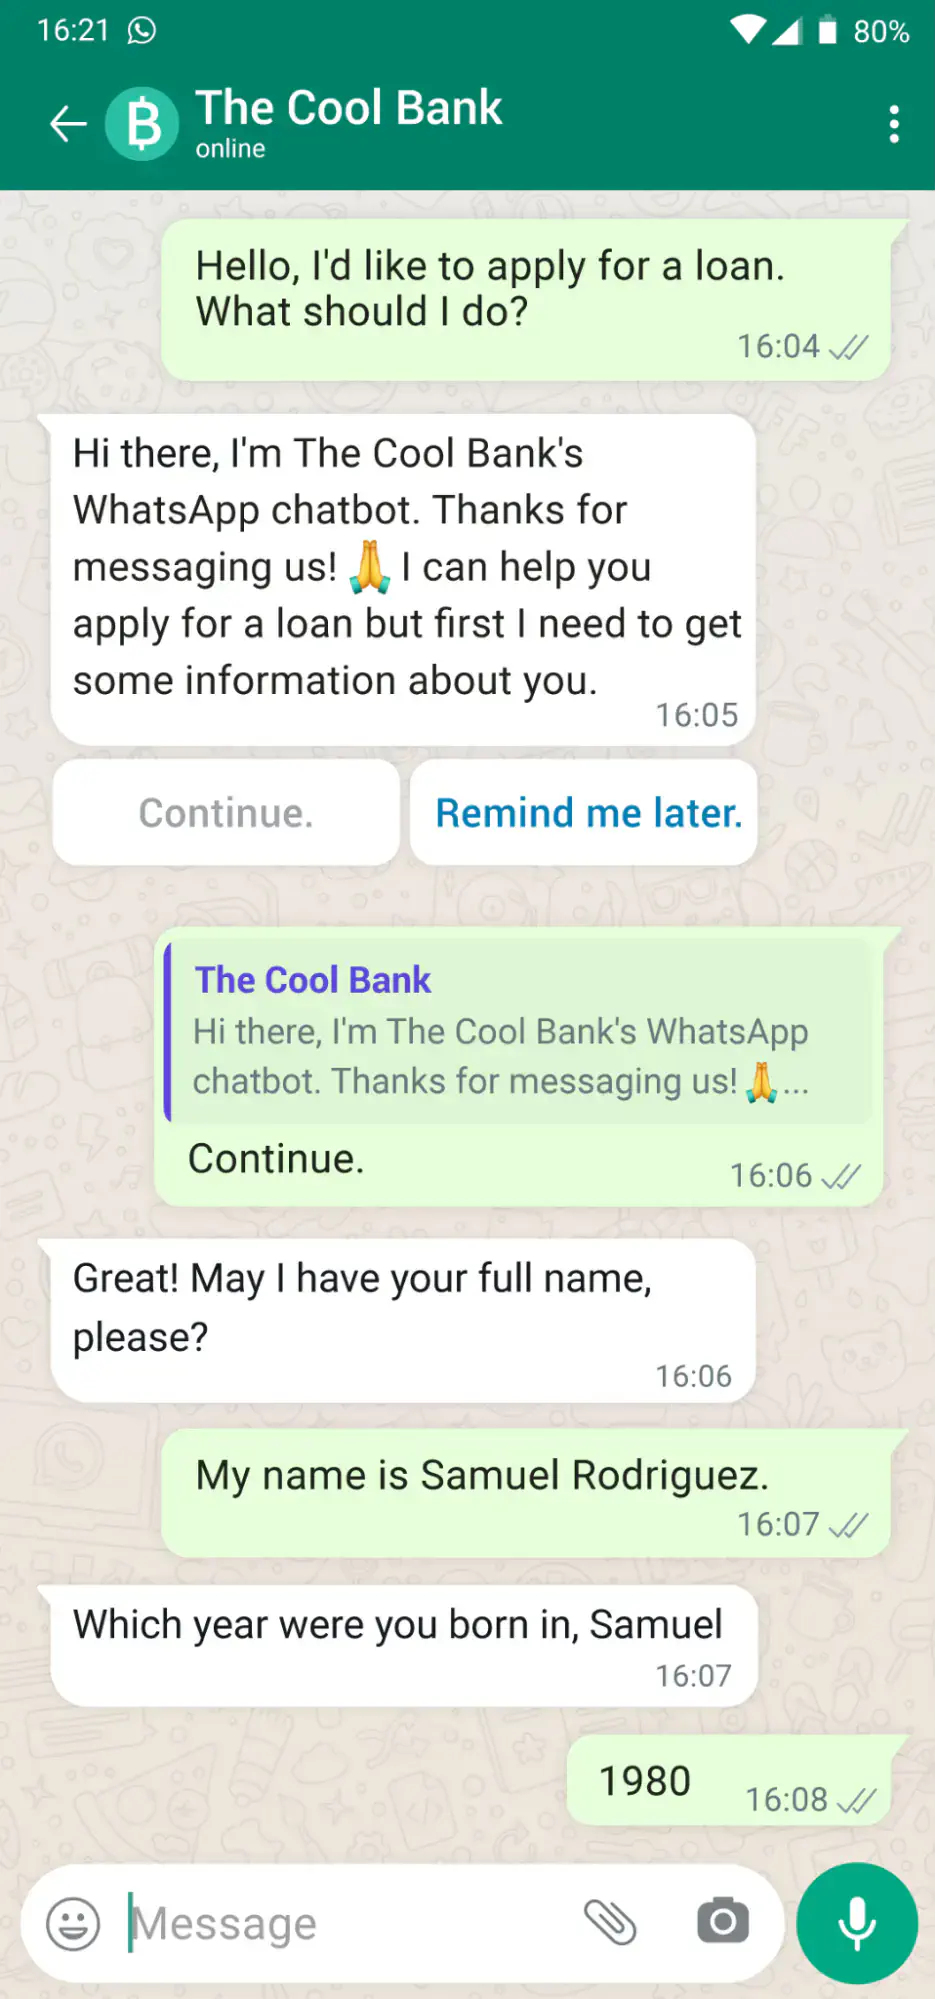 WhatsApp conversation with a chatobt used by a bank.